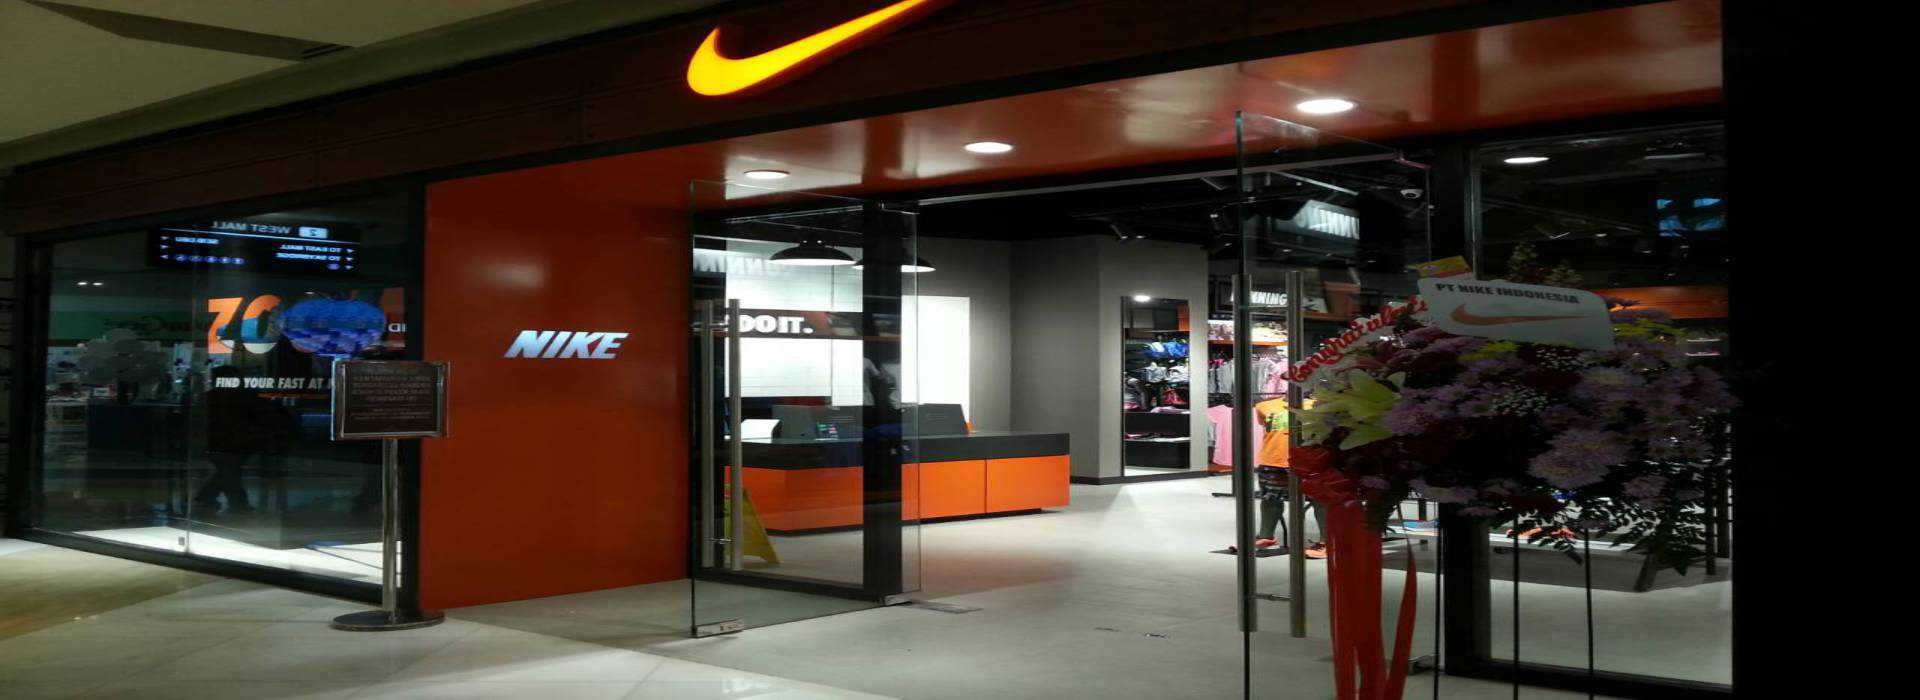 nike jpo contact number